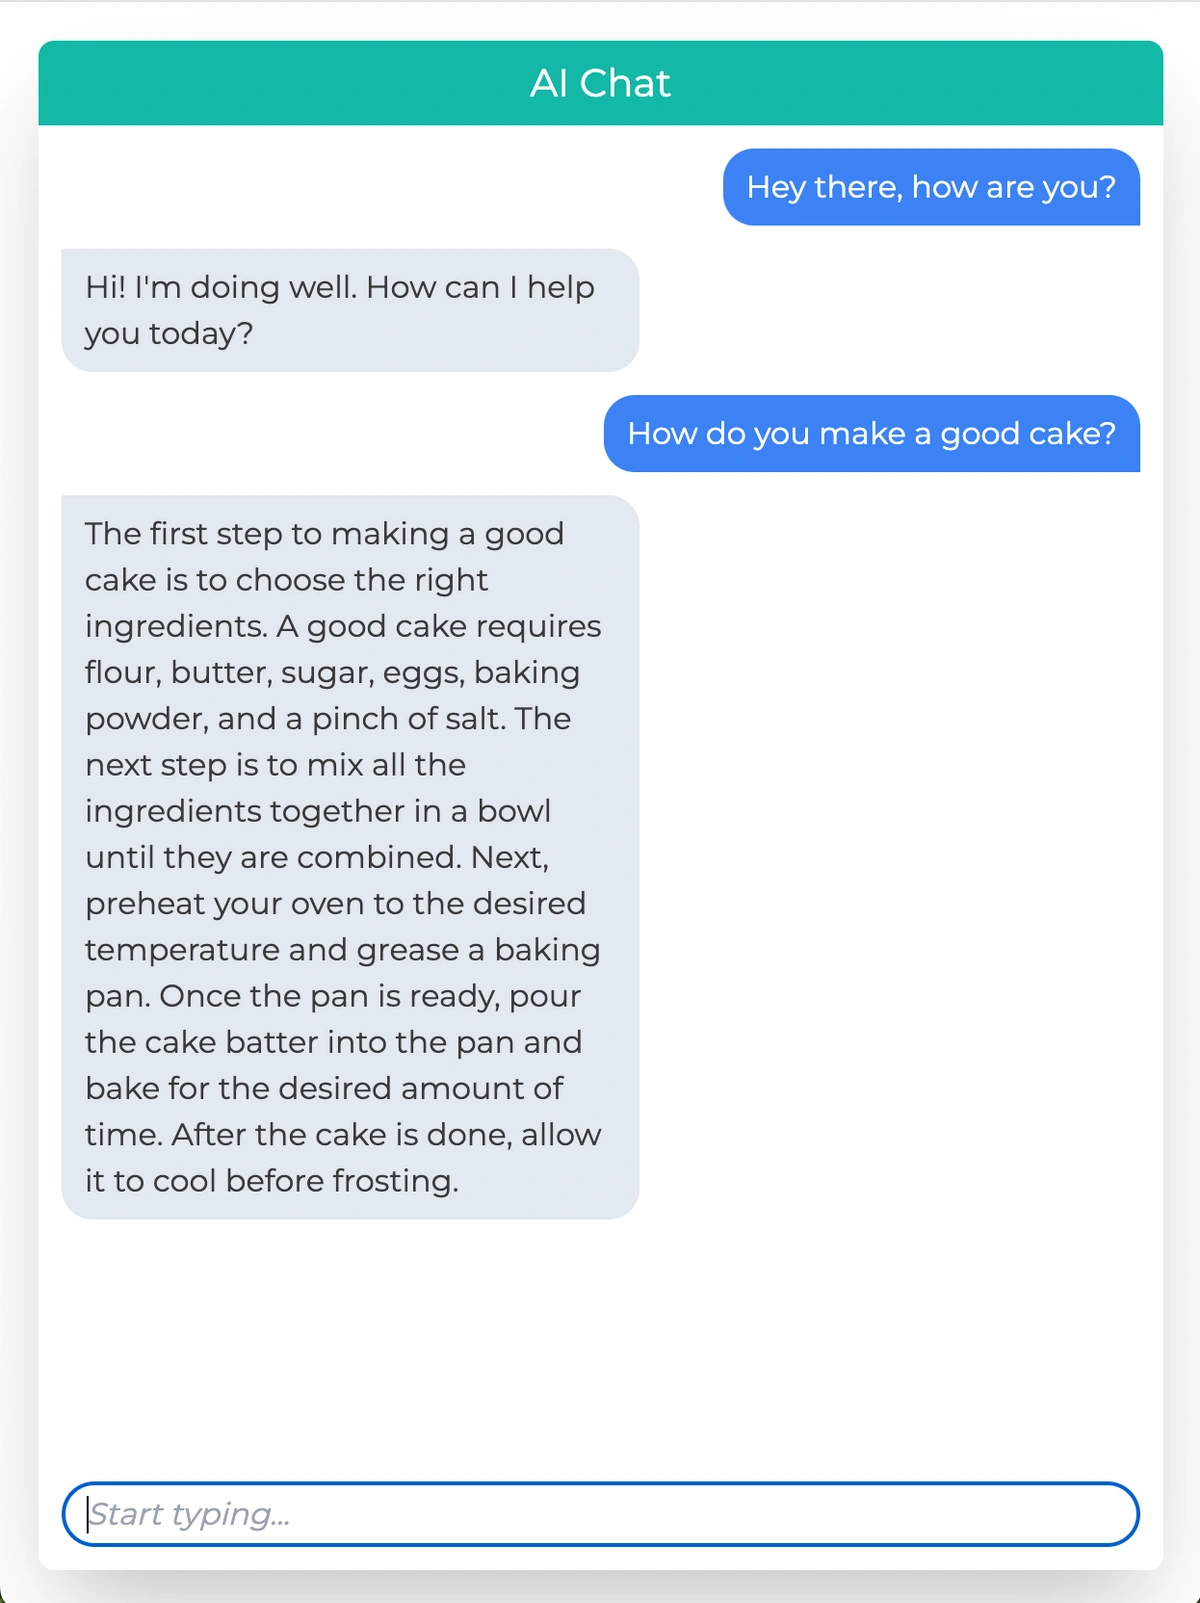 Screenshot of a small conversation with the AI chatbot